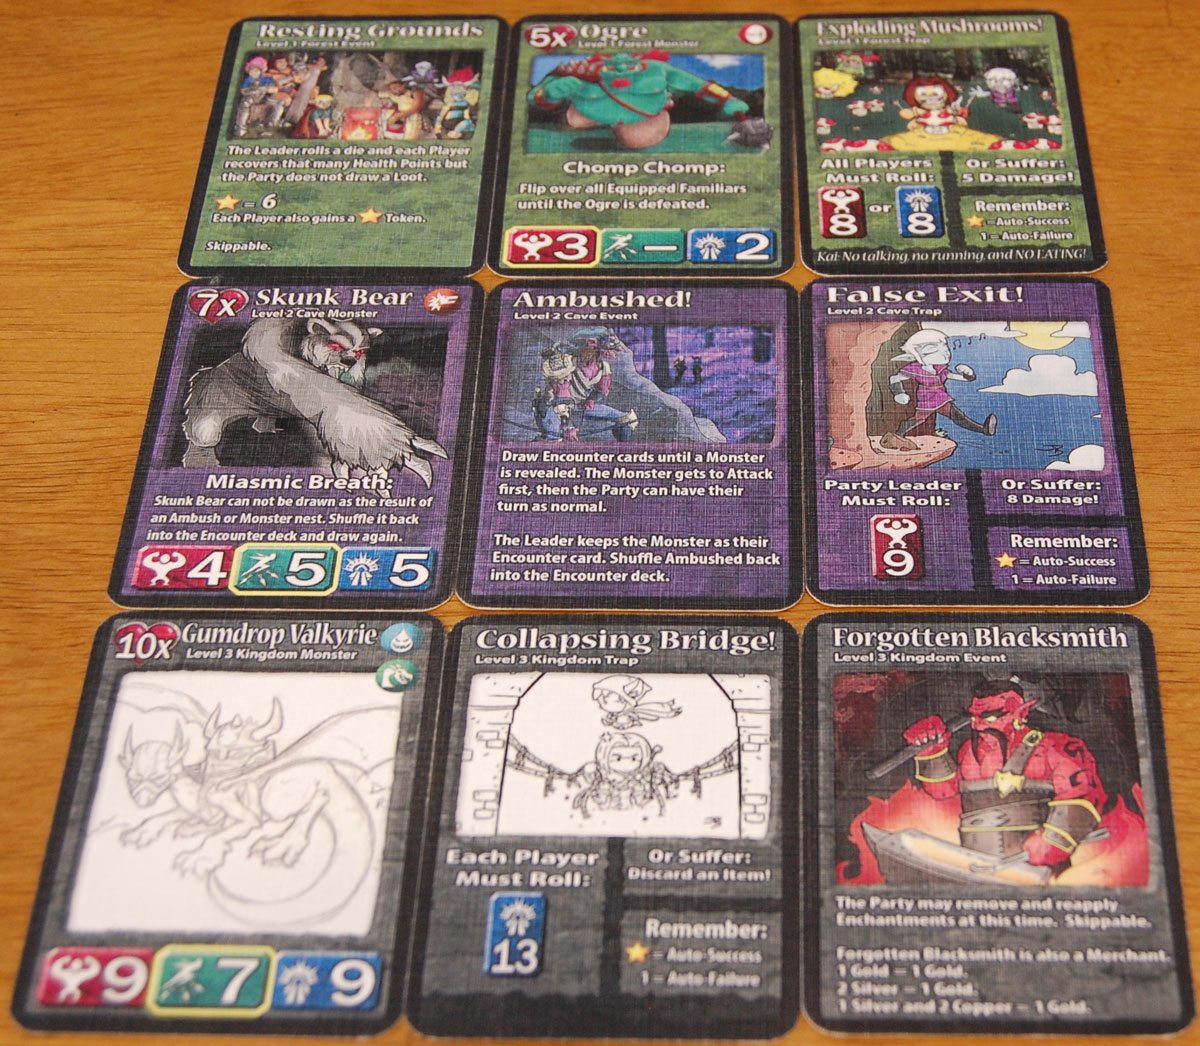 Some of the Random Encounters cards from the prototype. Artwork subject to change. Image by Rob Huddleston.